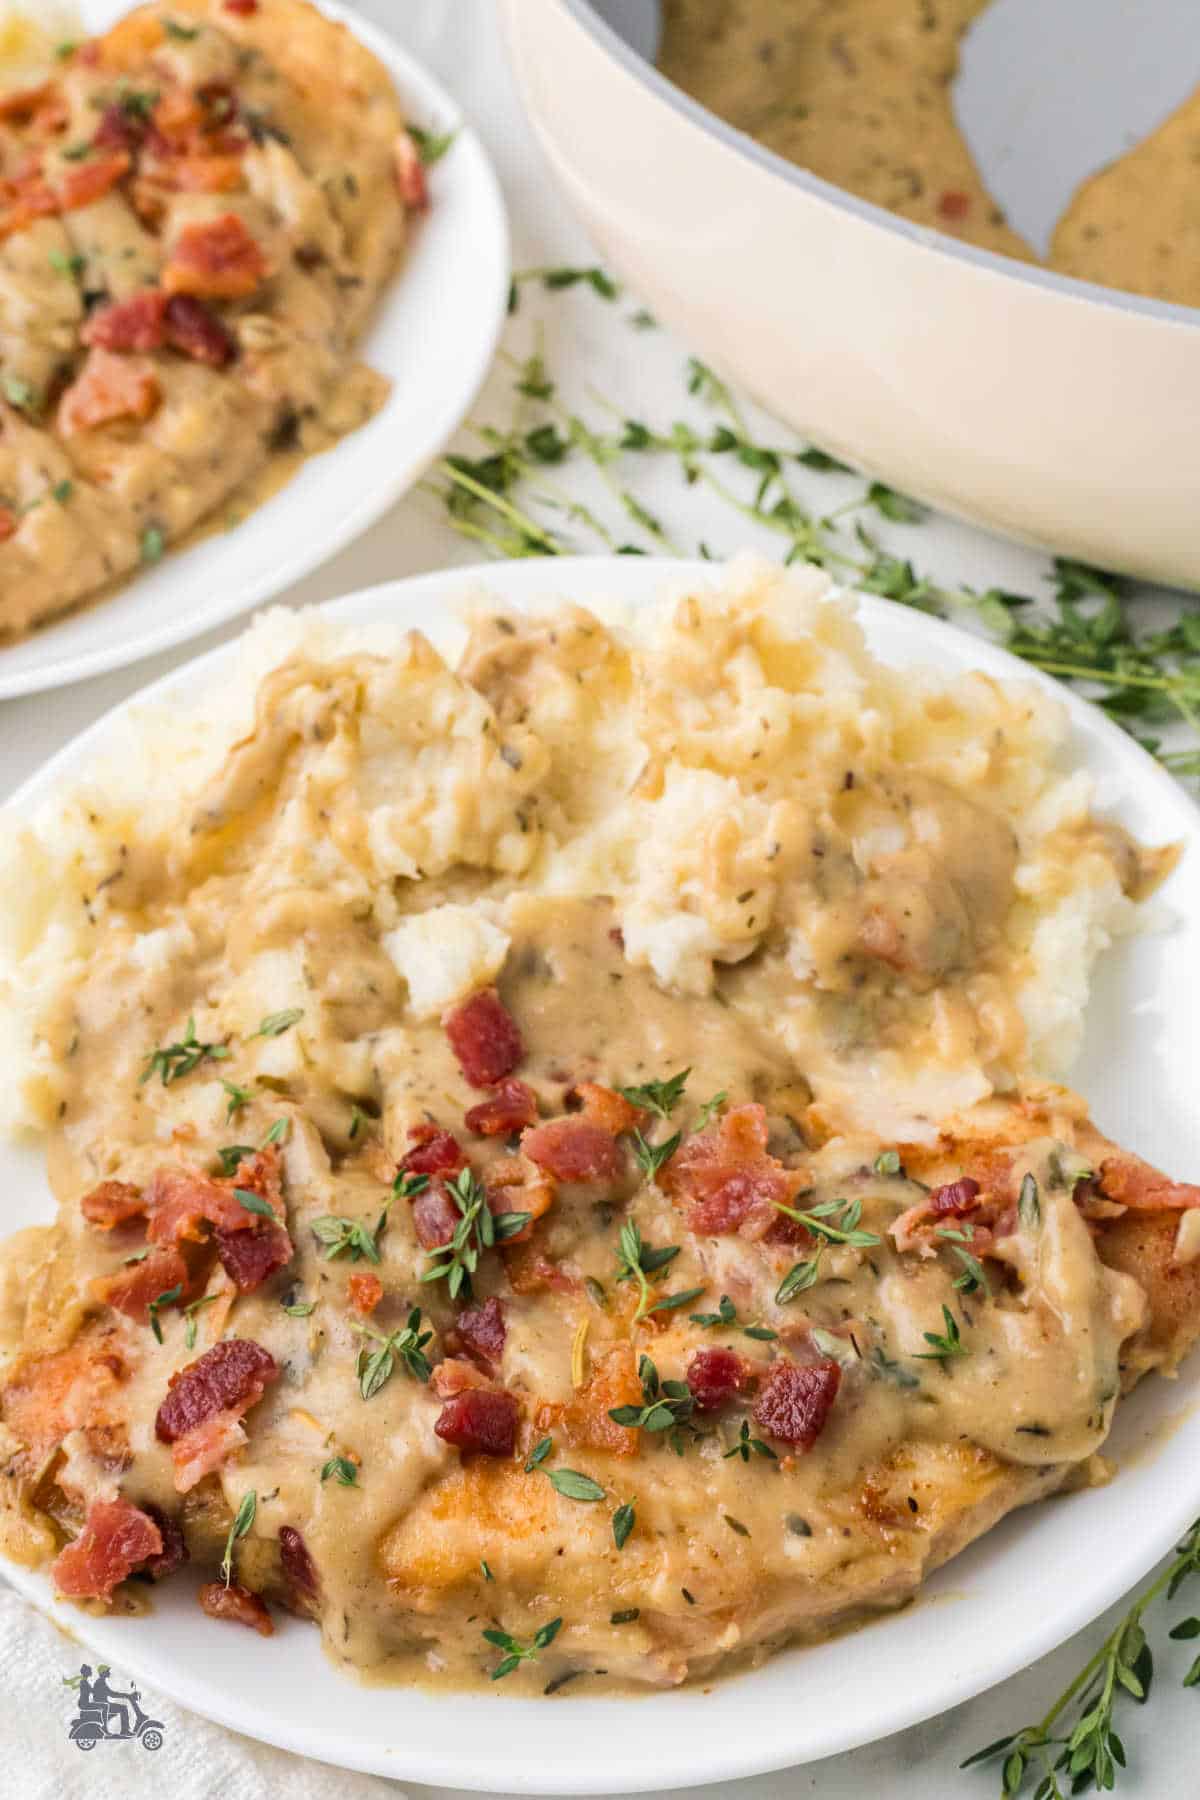 Chicken smothered in a creamy white gravy with crispy bacon sprinkled on top.